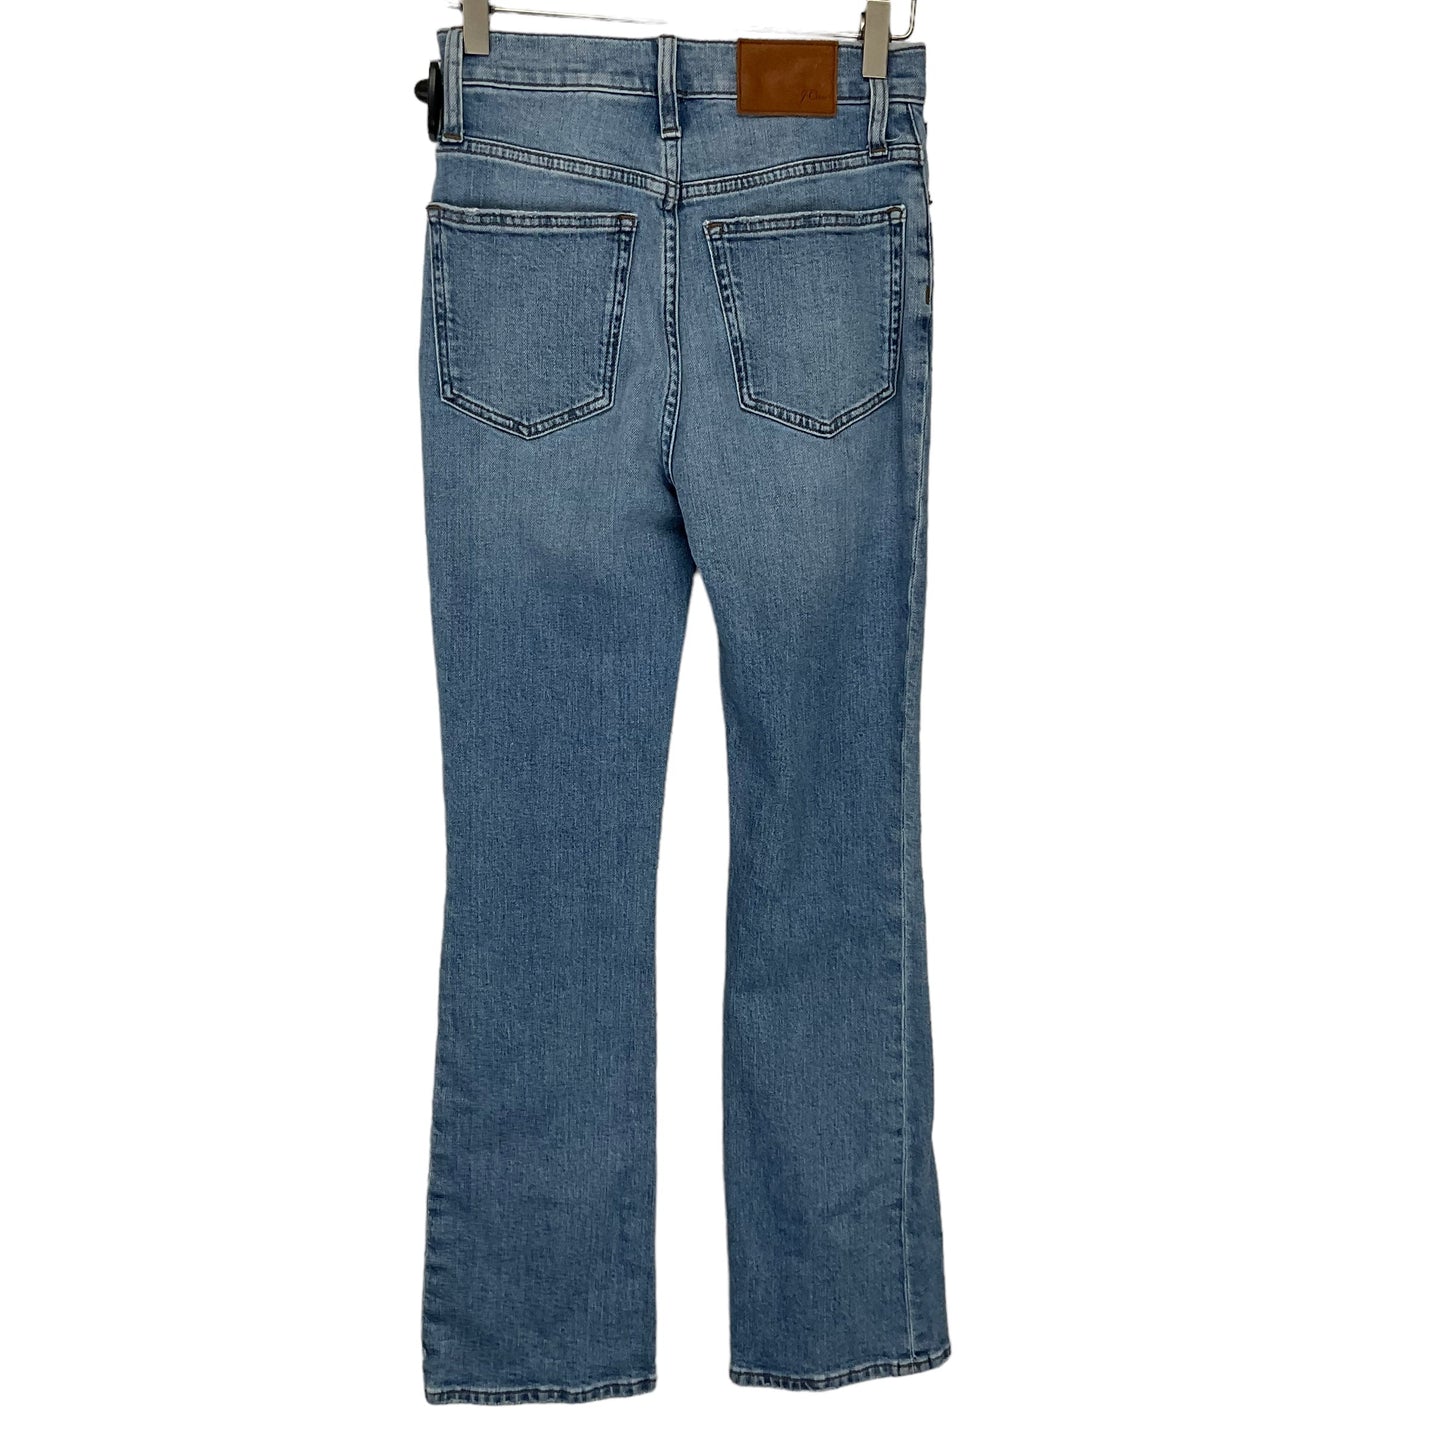 Jeans Straight By J. Crew  Size: 0